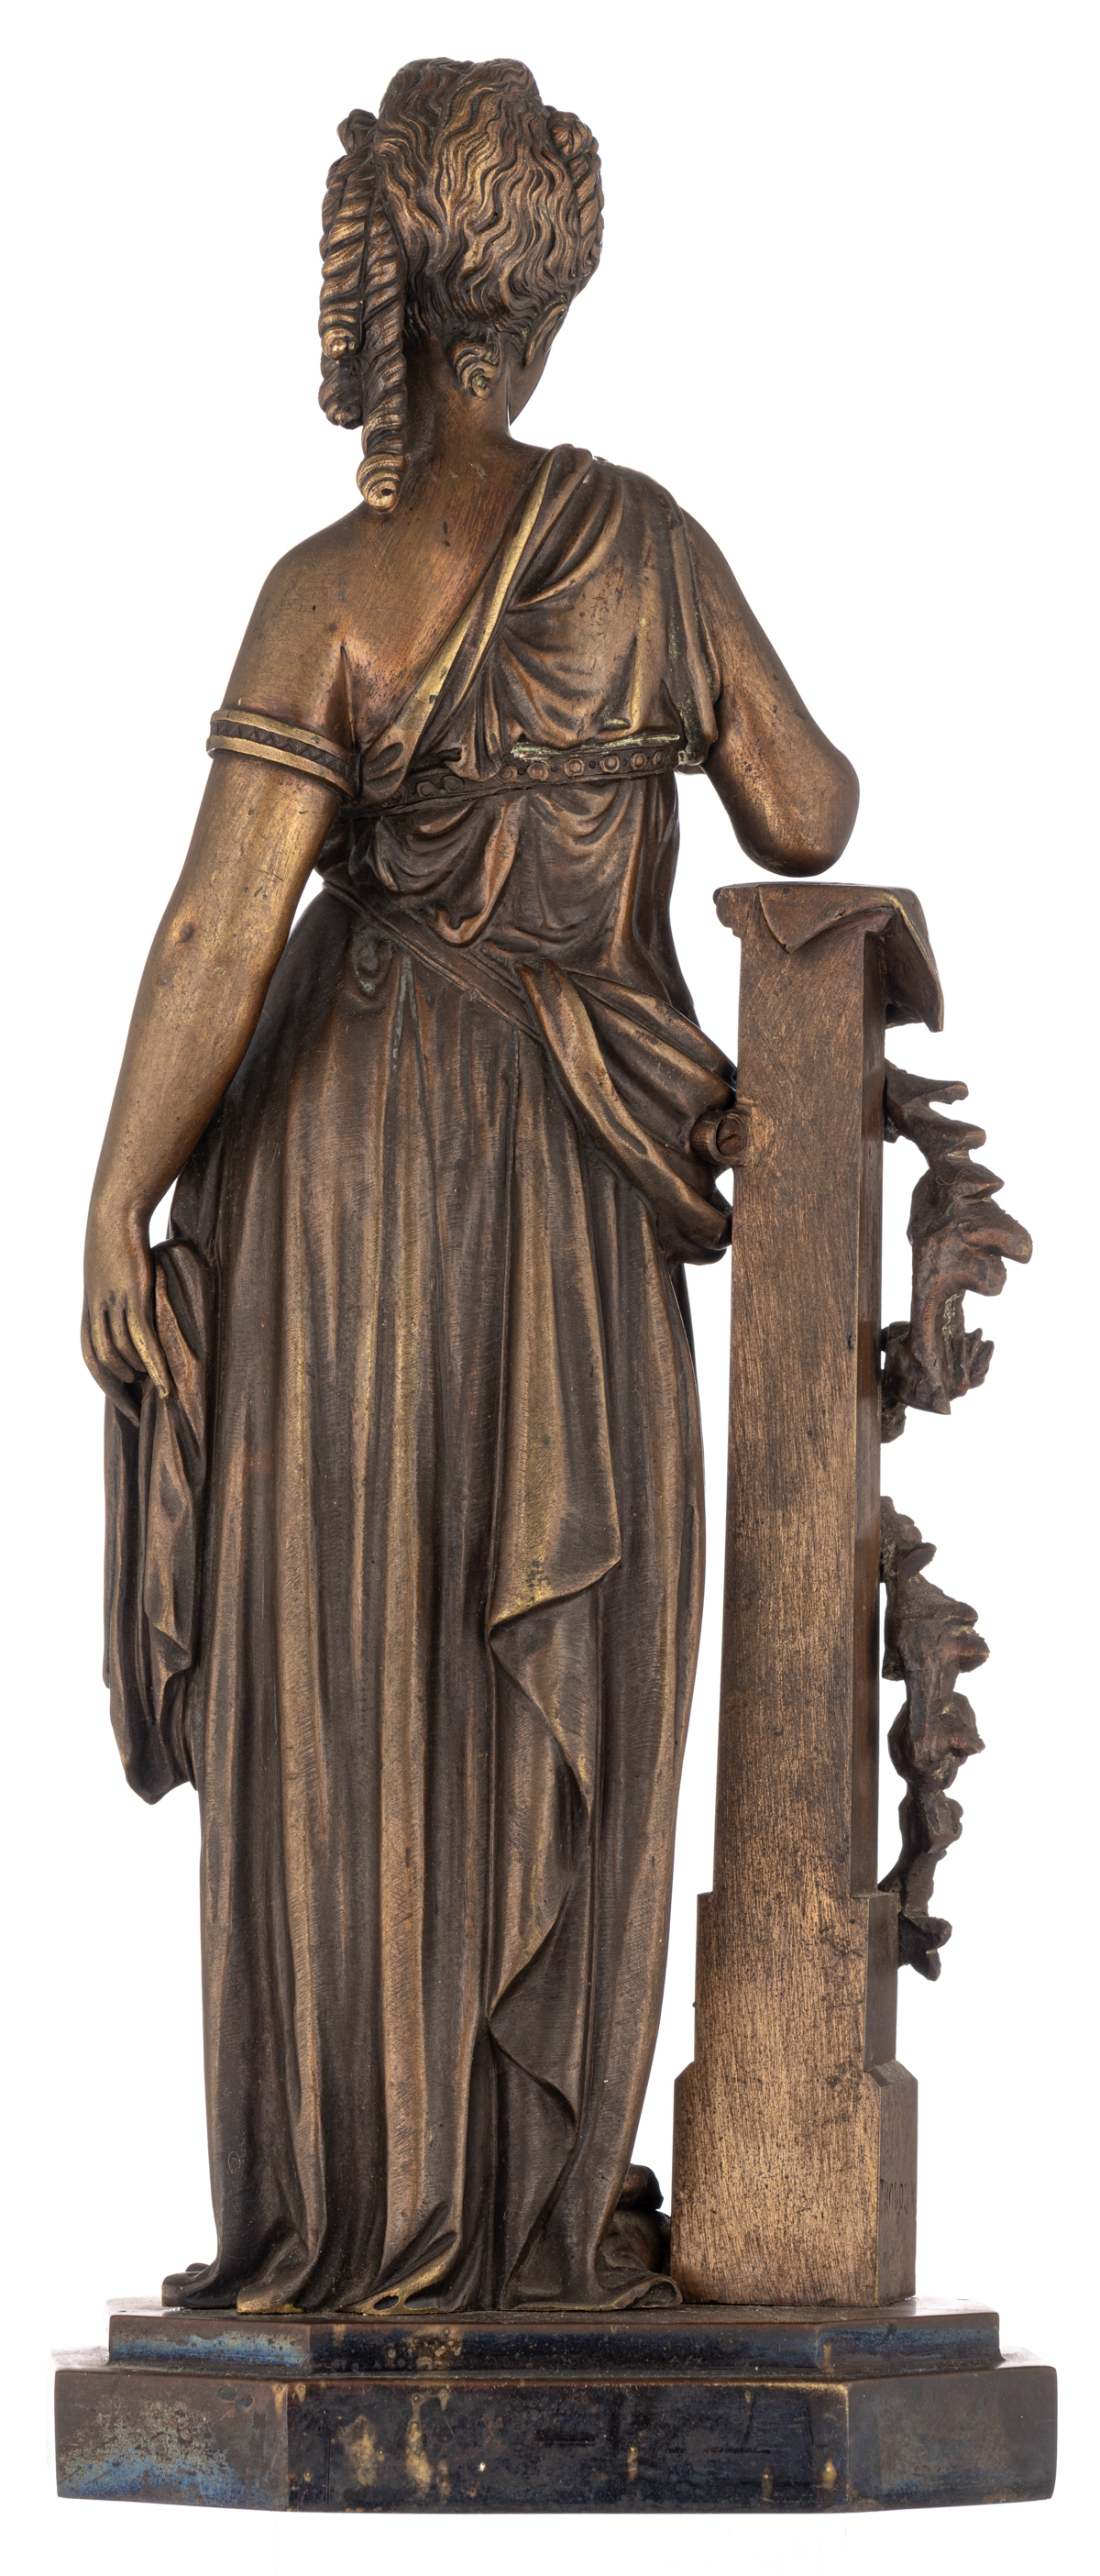 Trodoux H., Diana standing, patinated bronze, H 43 cm - Image 3 of 7